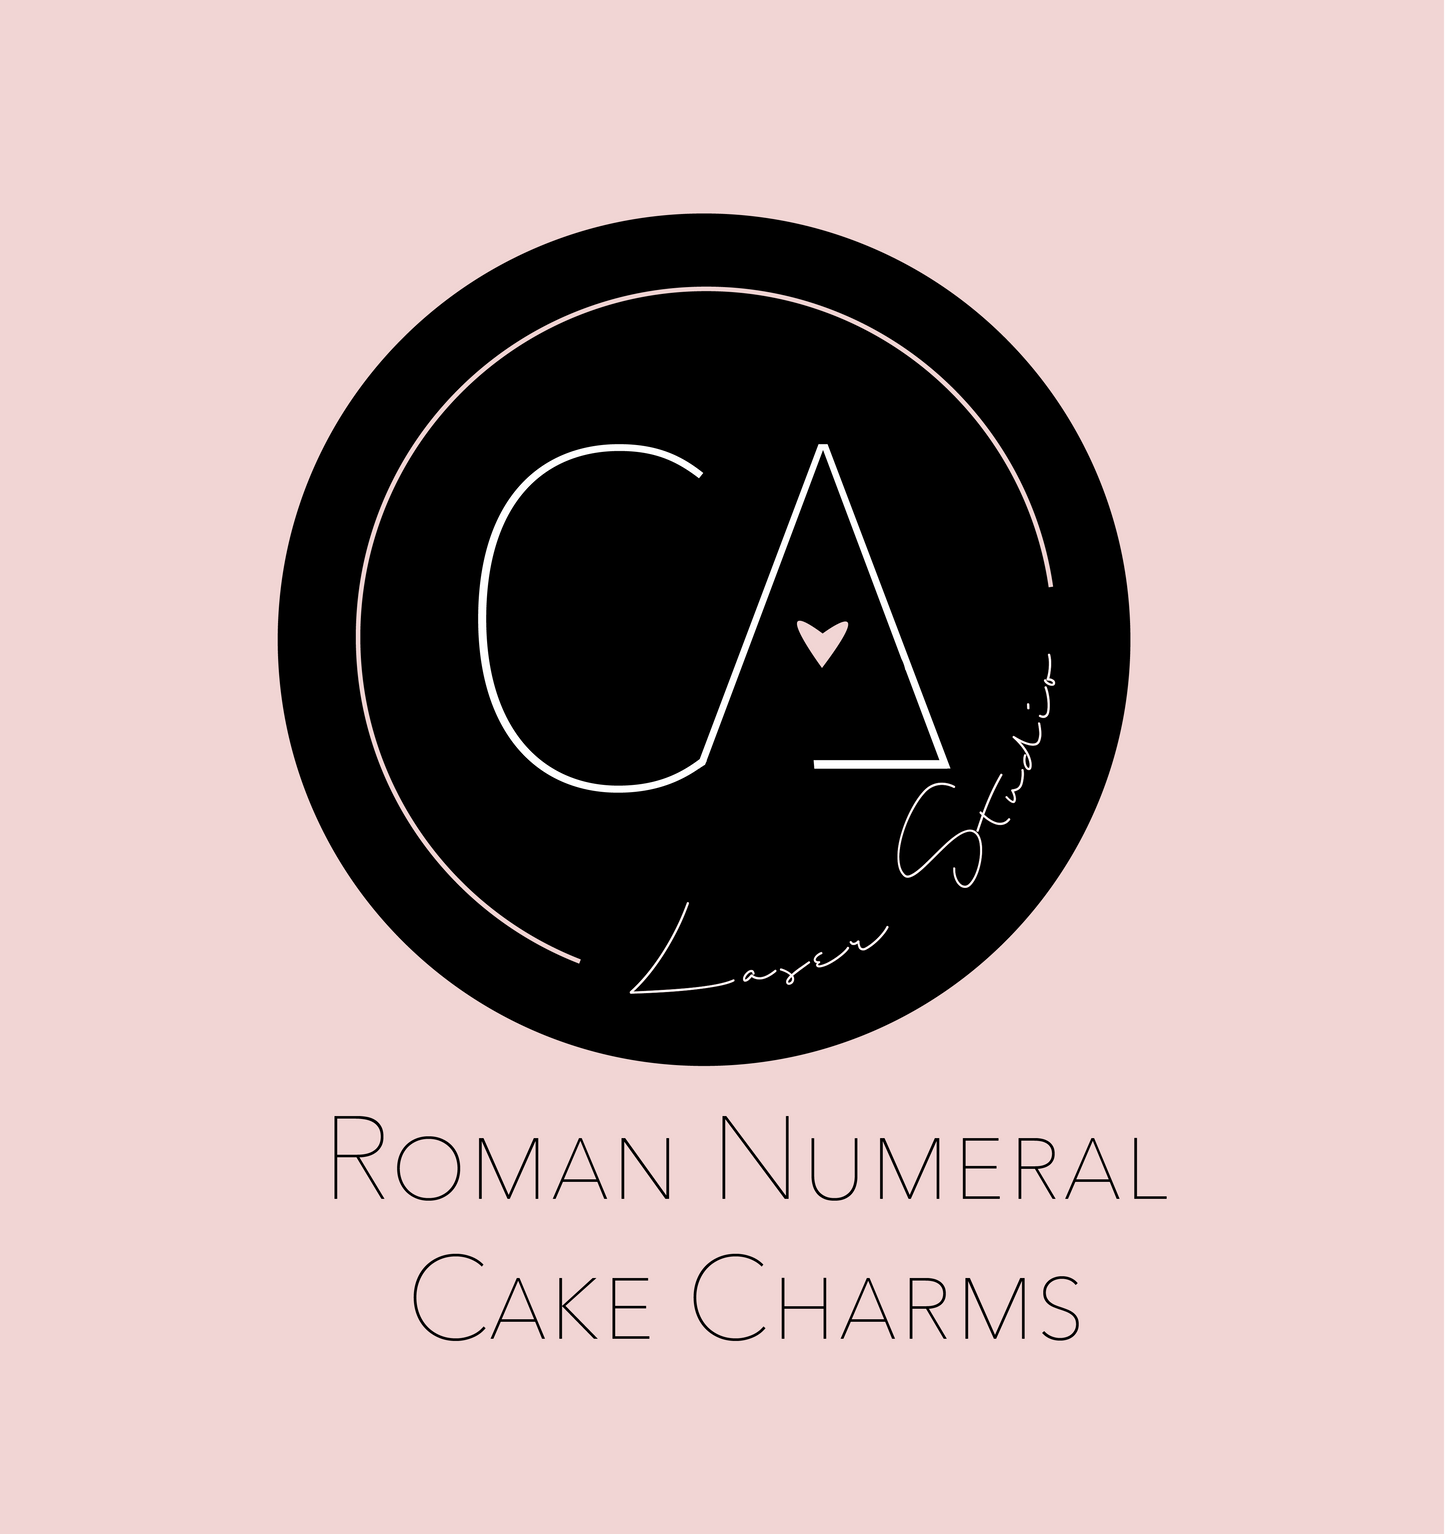 Roman Numeral Cake Charms